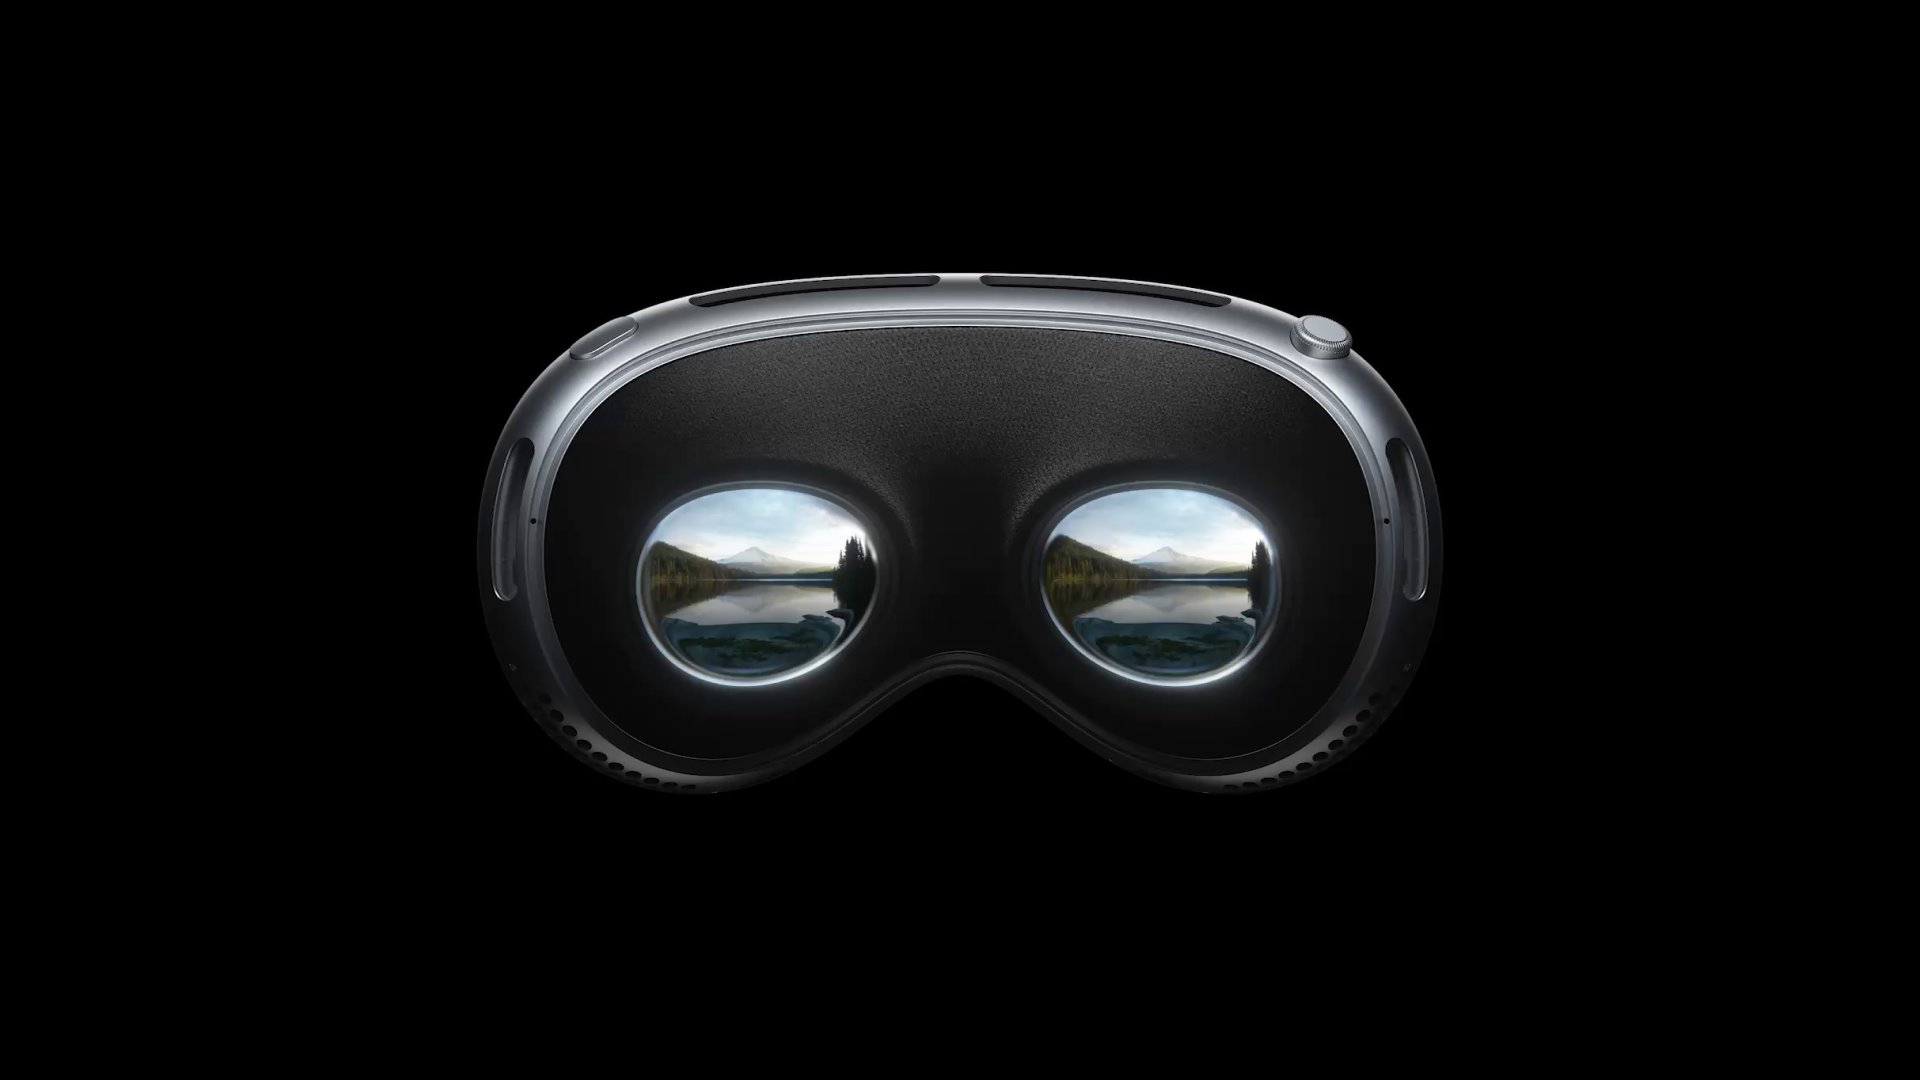 Close-up of high-resolution virtual reality goggles with a scenic mountain lake reflected in the lenses.